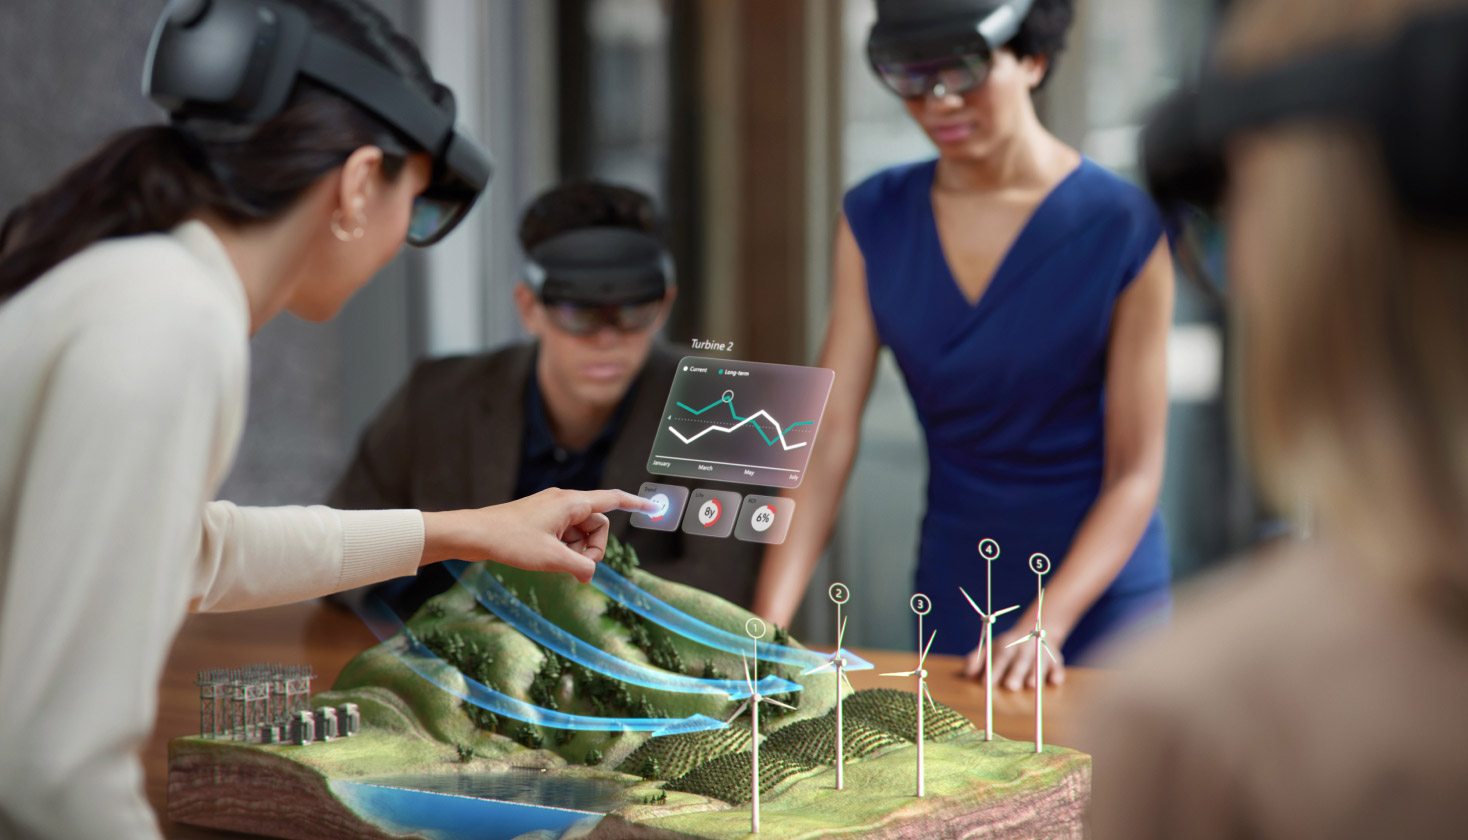 Where Do You Interact With Augmented Reality?